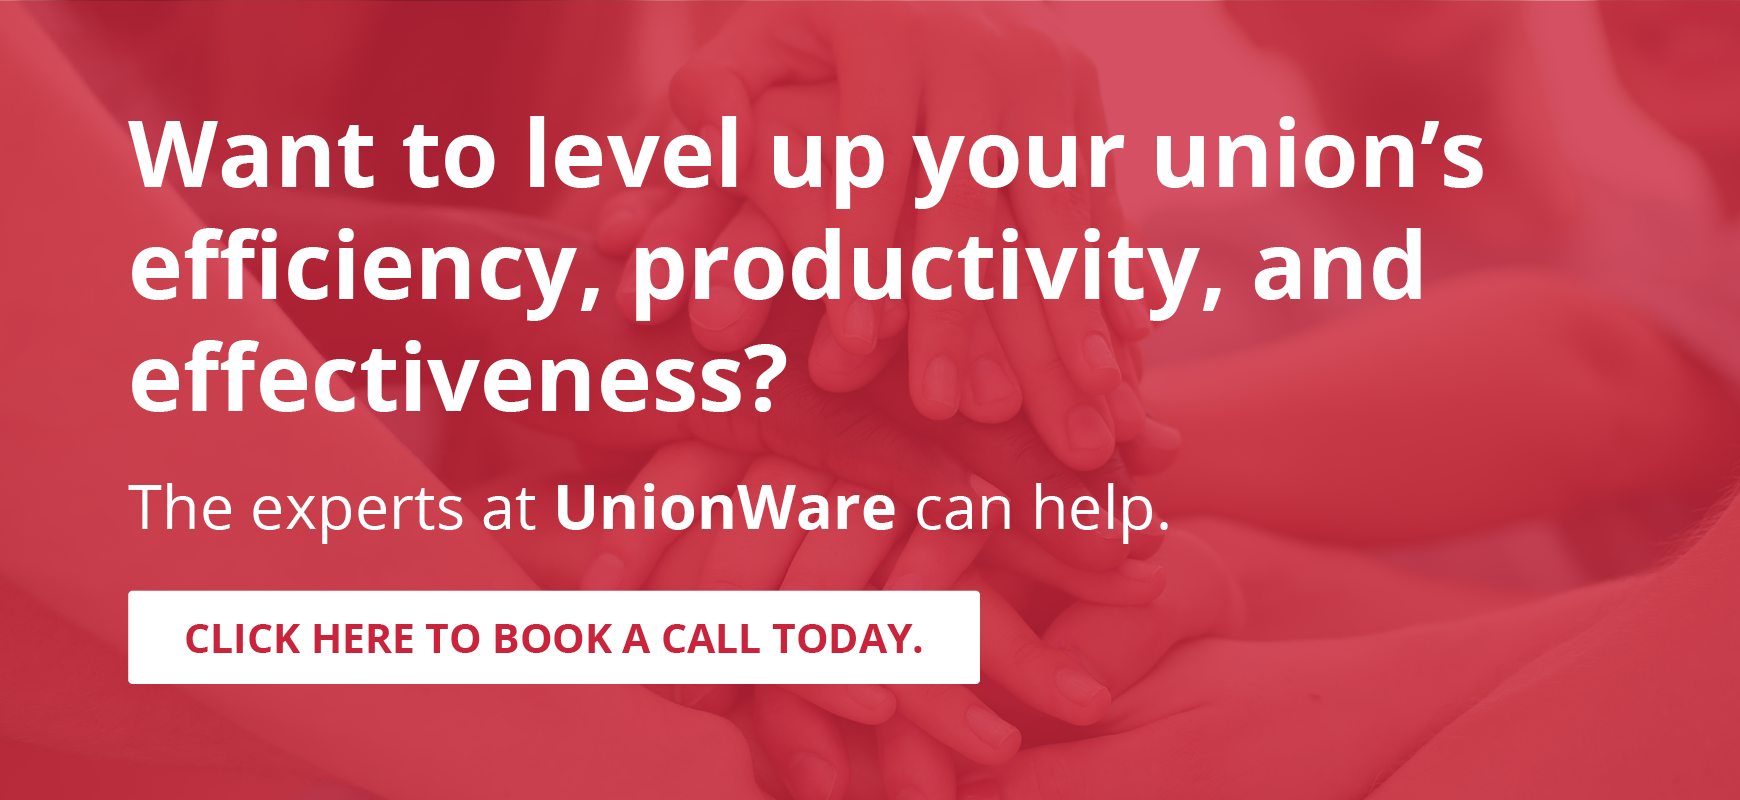 Click here to book a call with the experts at Unionware.